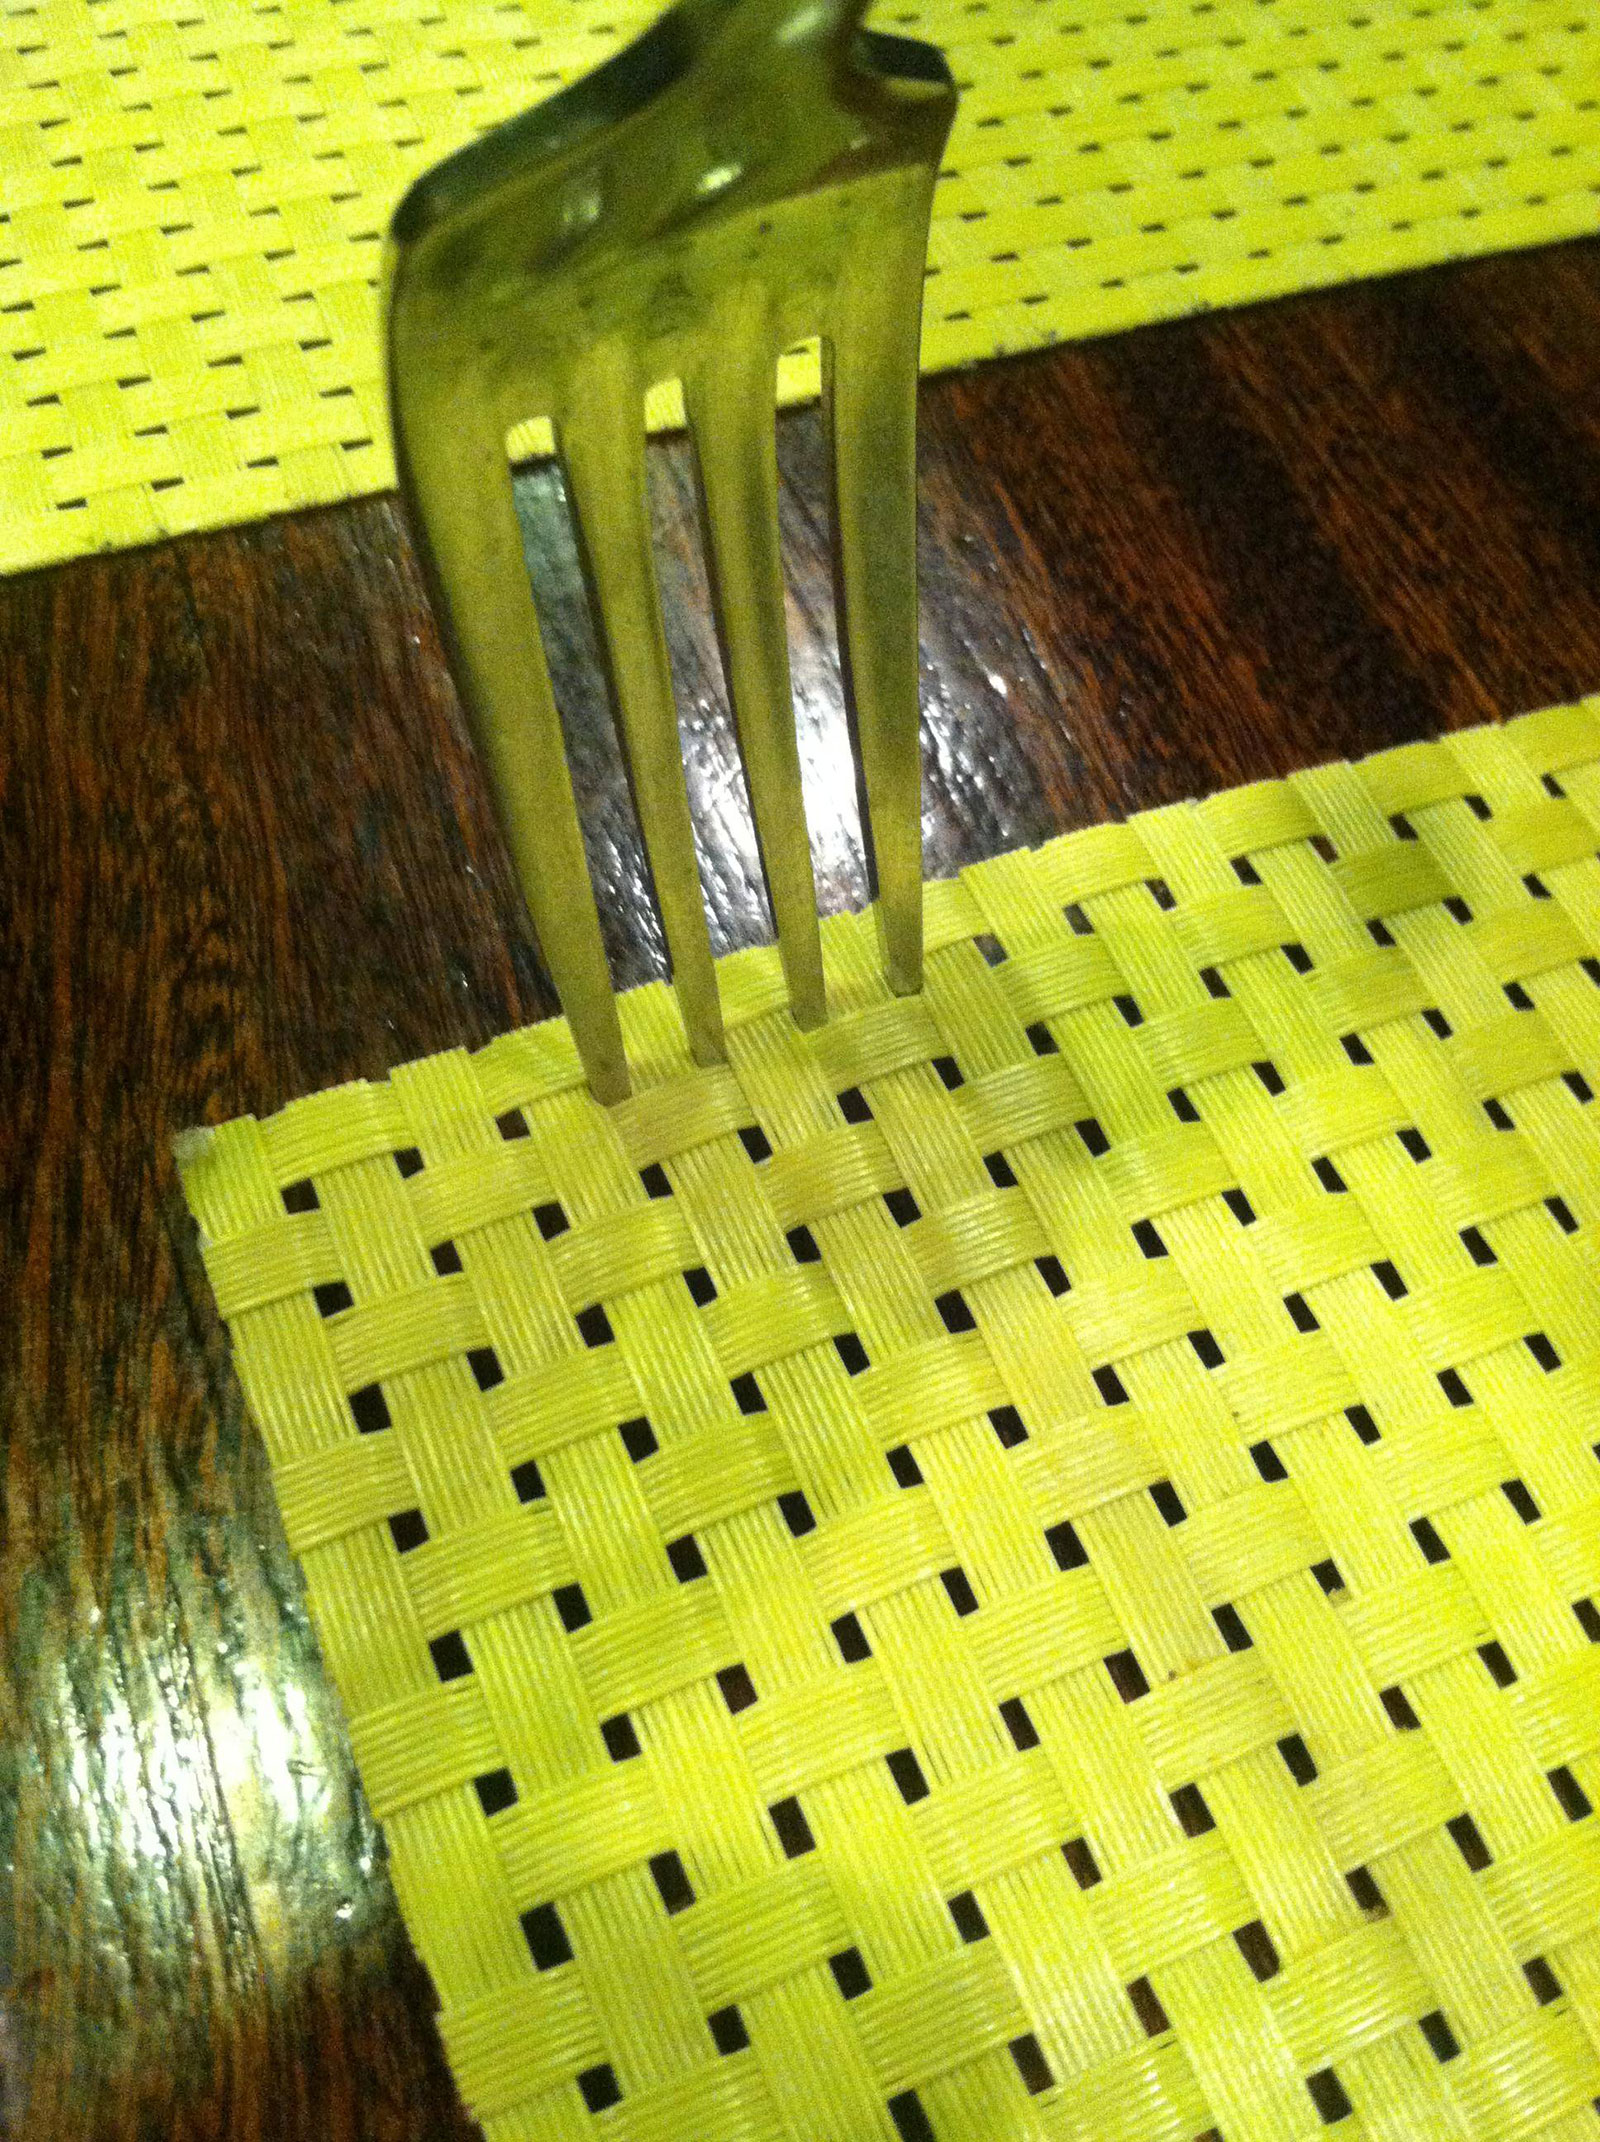 A fork that stuck right into a place mat.